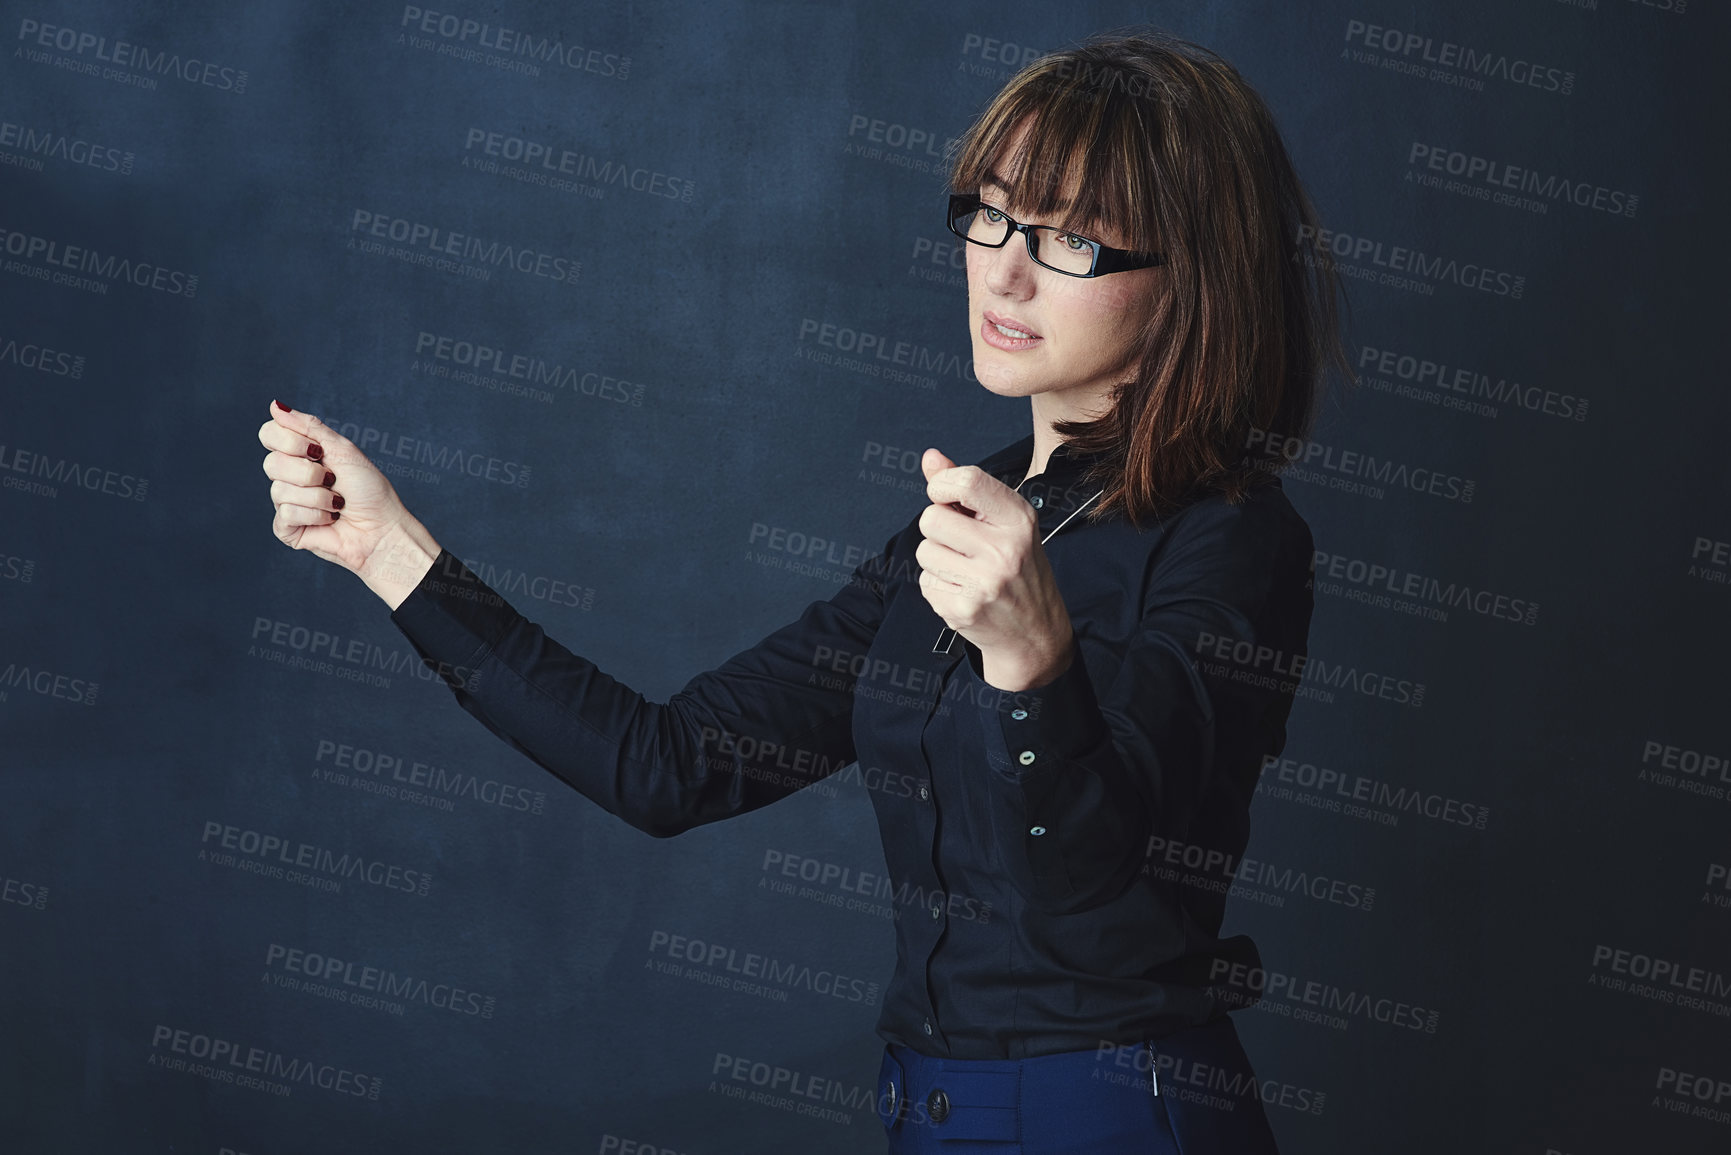 Buy stock photo Studio shot of a corporate businesswoman pretending to hold something against a dark background